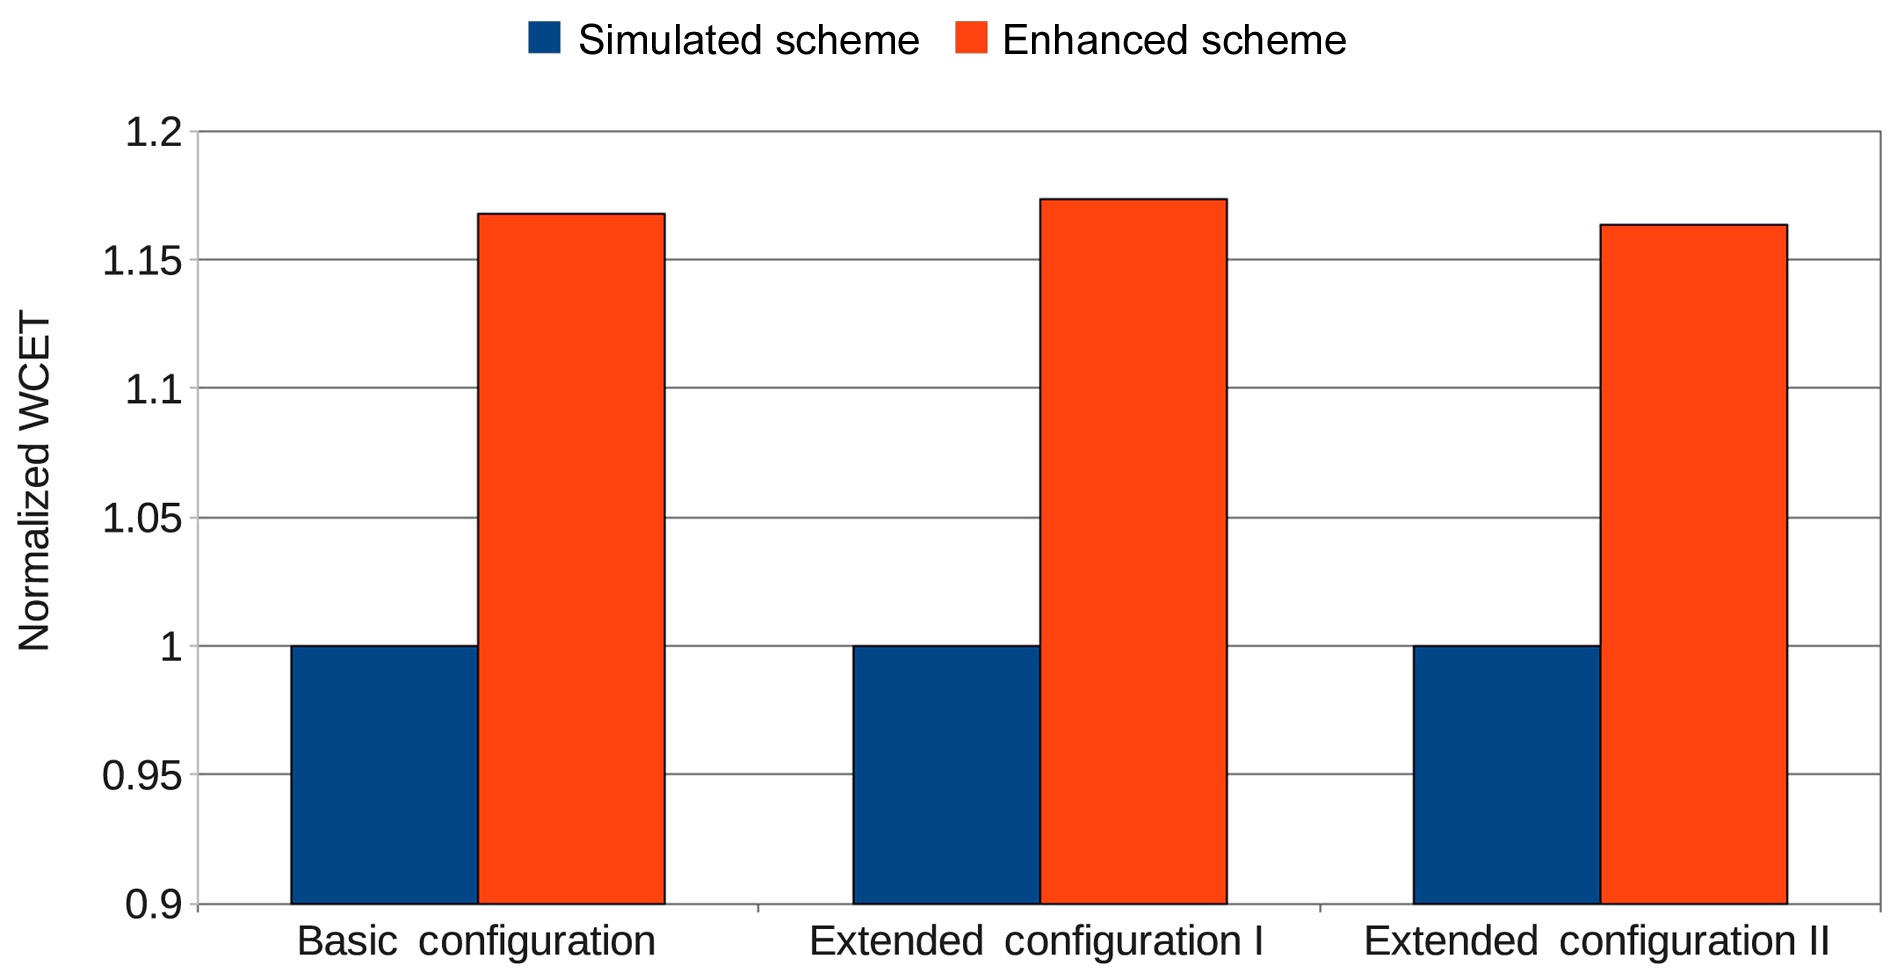 The comparison of the worst-case execution time (WCET) of the enhanced scheme normalized with that of the simulated scheme in basic configuration, extended configuration I and extended configuration II for 2 cores.